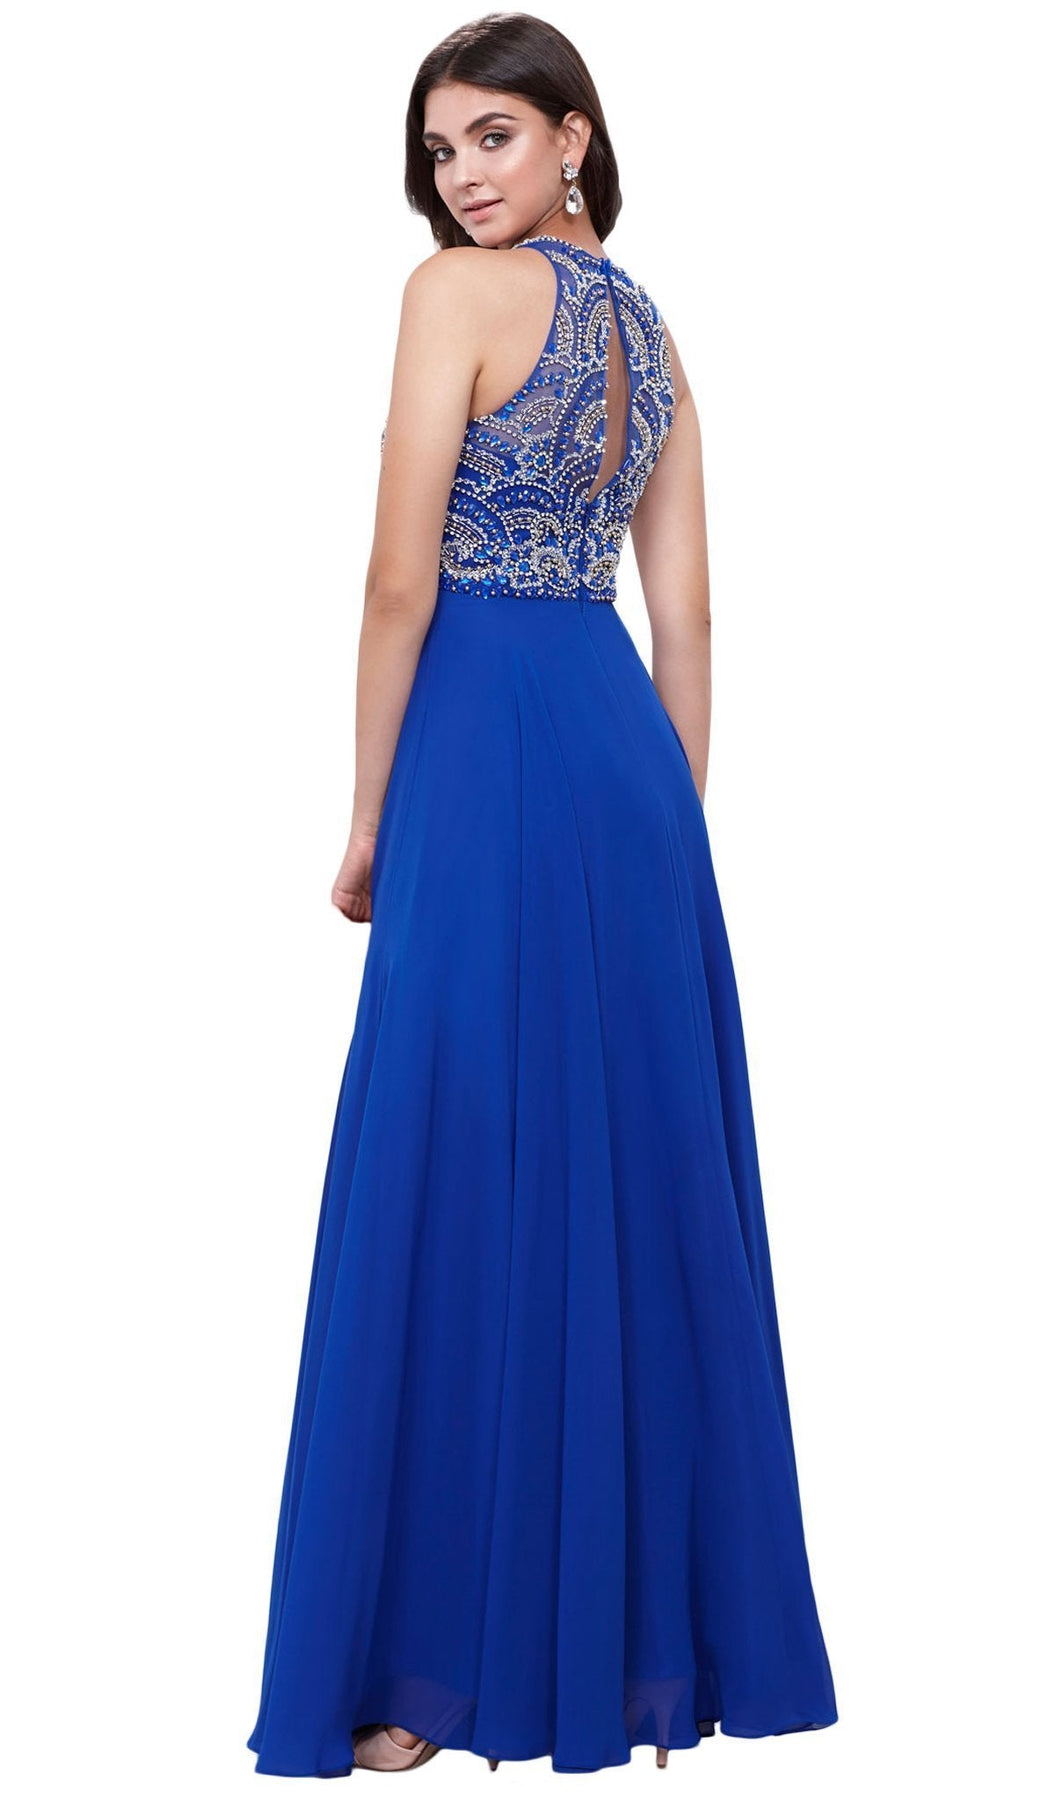 Nox Anabel - 8277 Sleeveless High Neck Beaded Bodice A-line Dress Special Occasion Dress